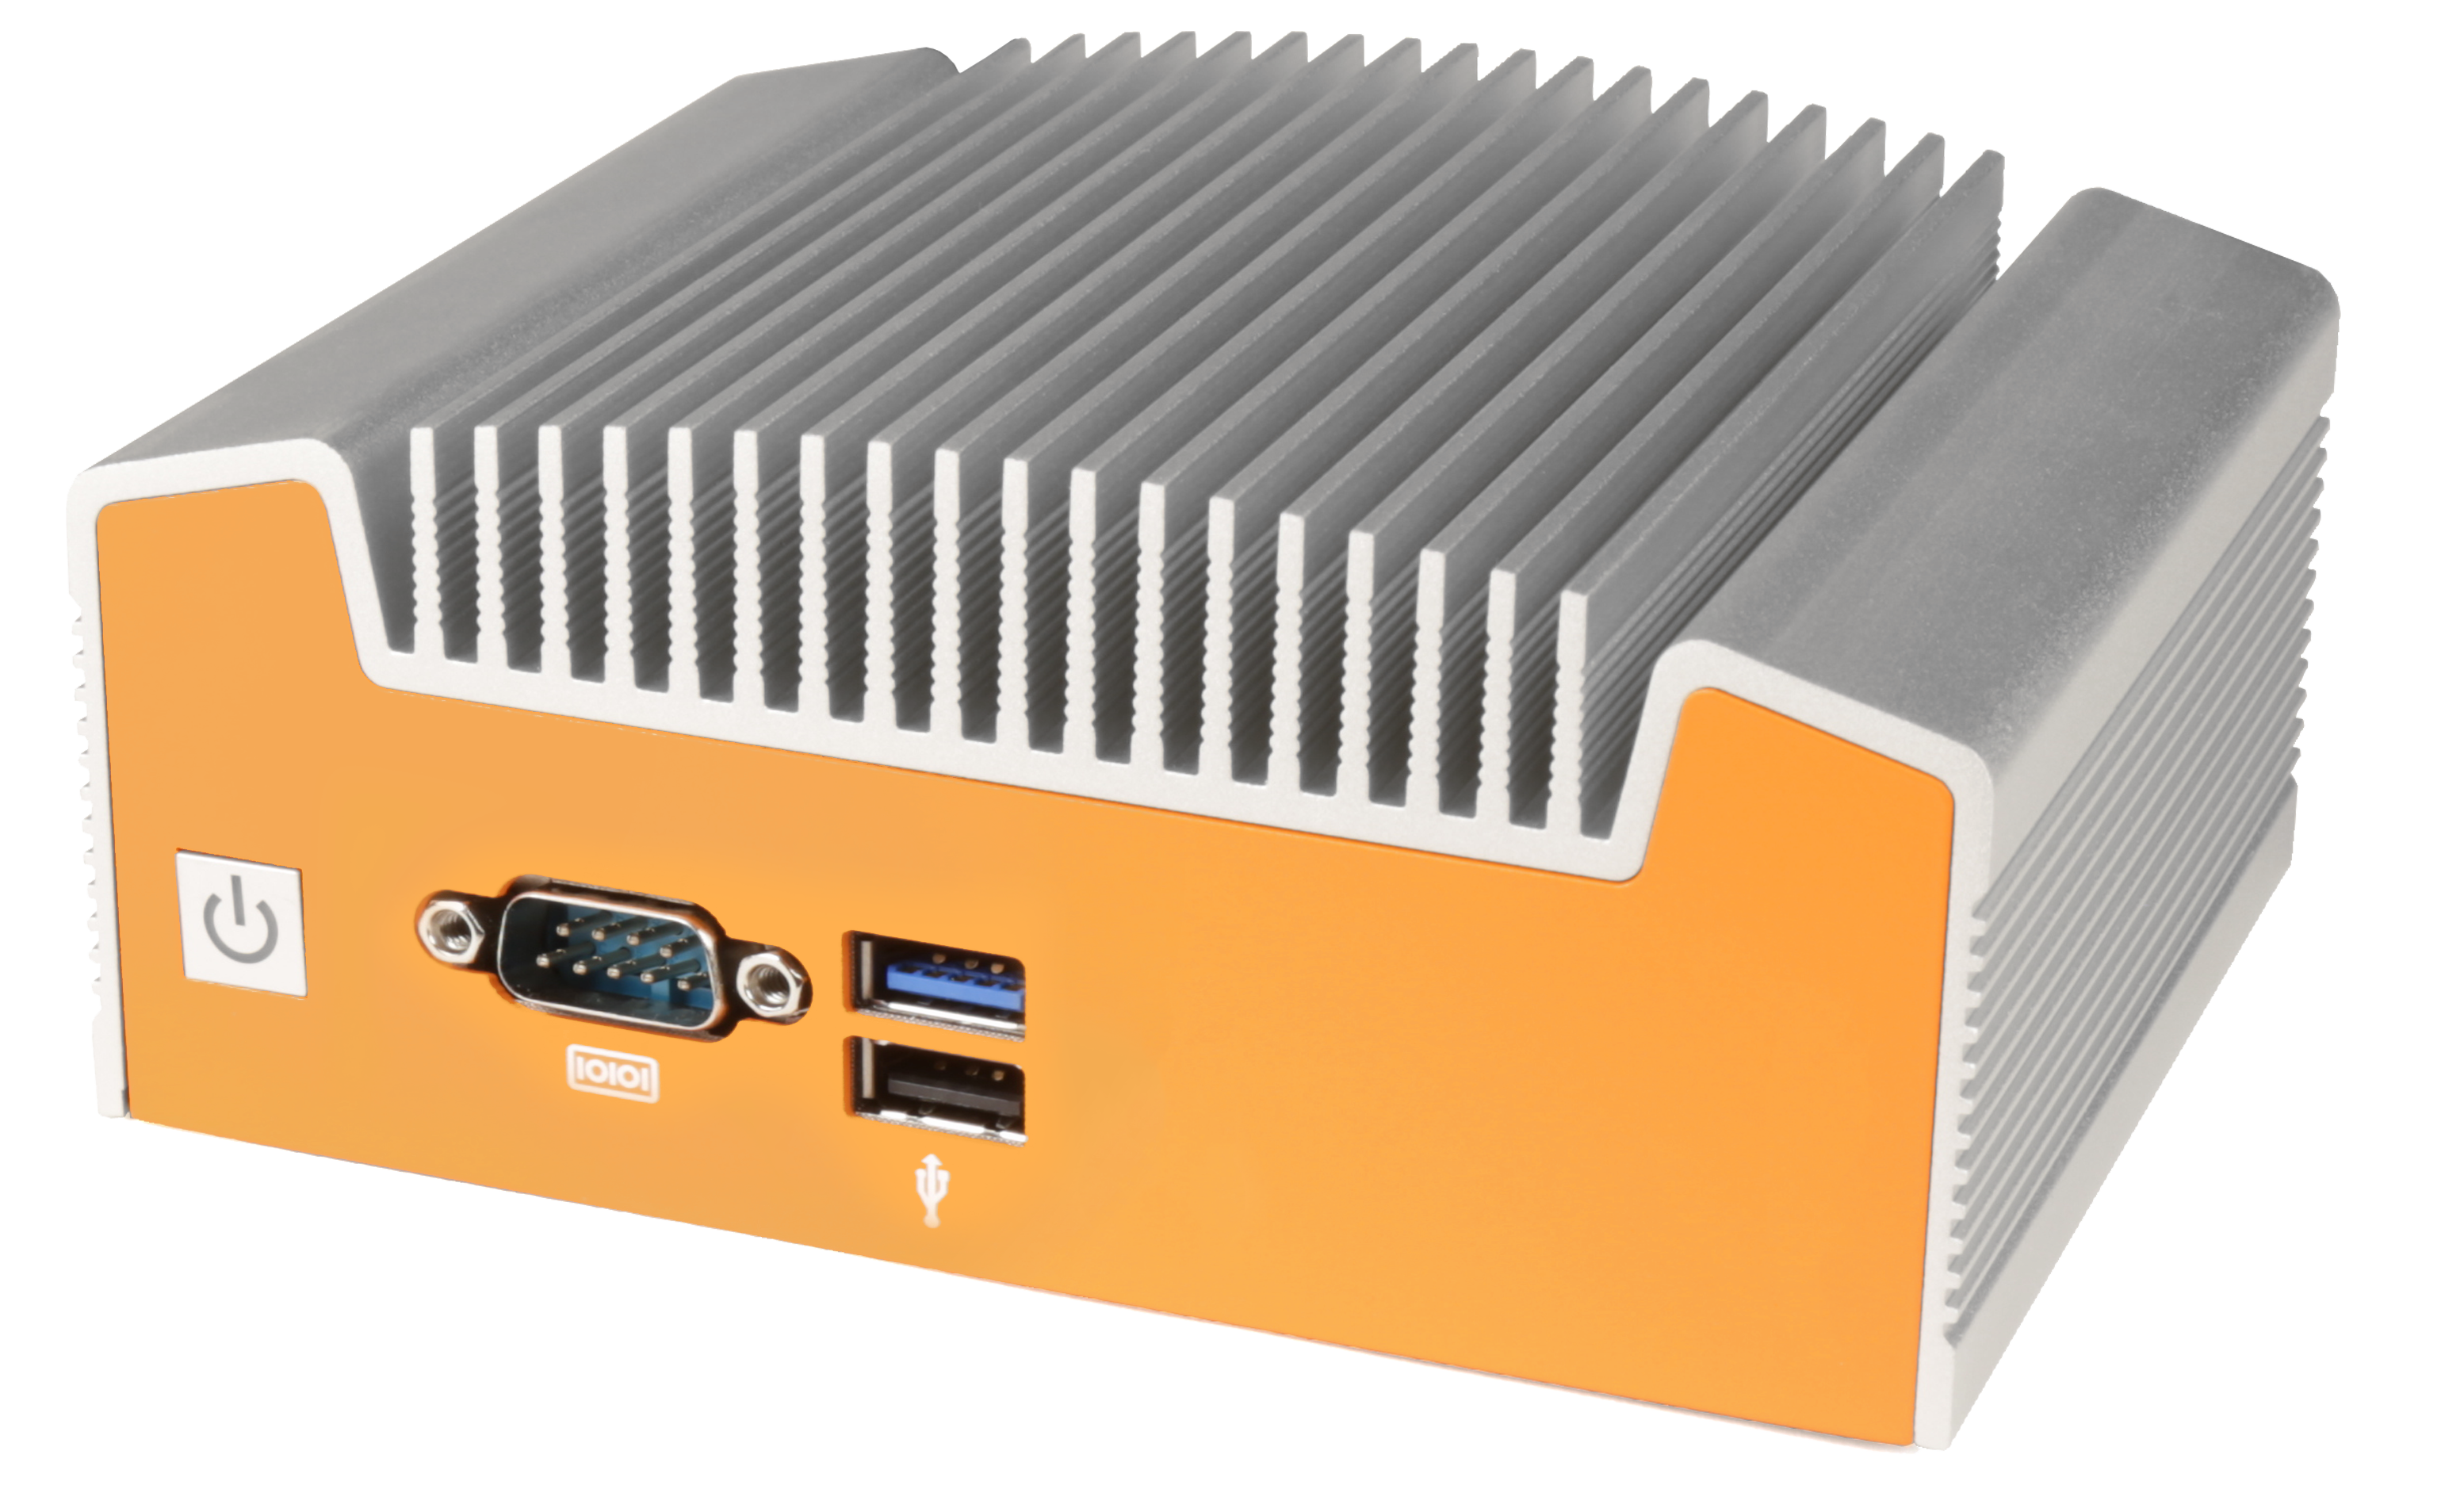 OnLogic ML100 rugged computer with distinctive orange color and fins for fanless cooling